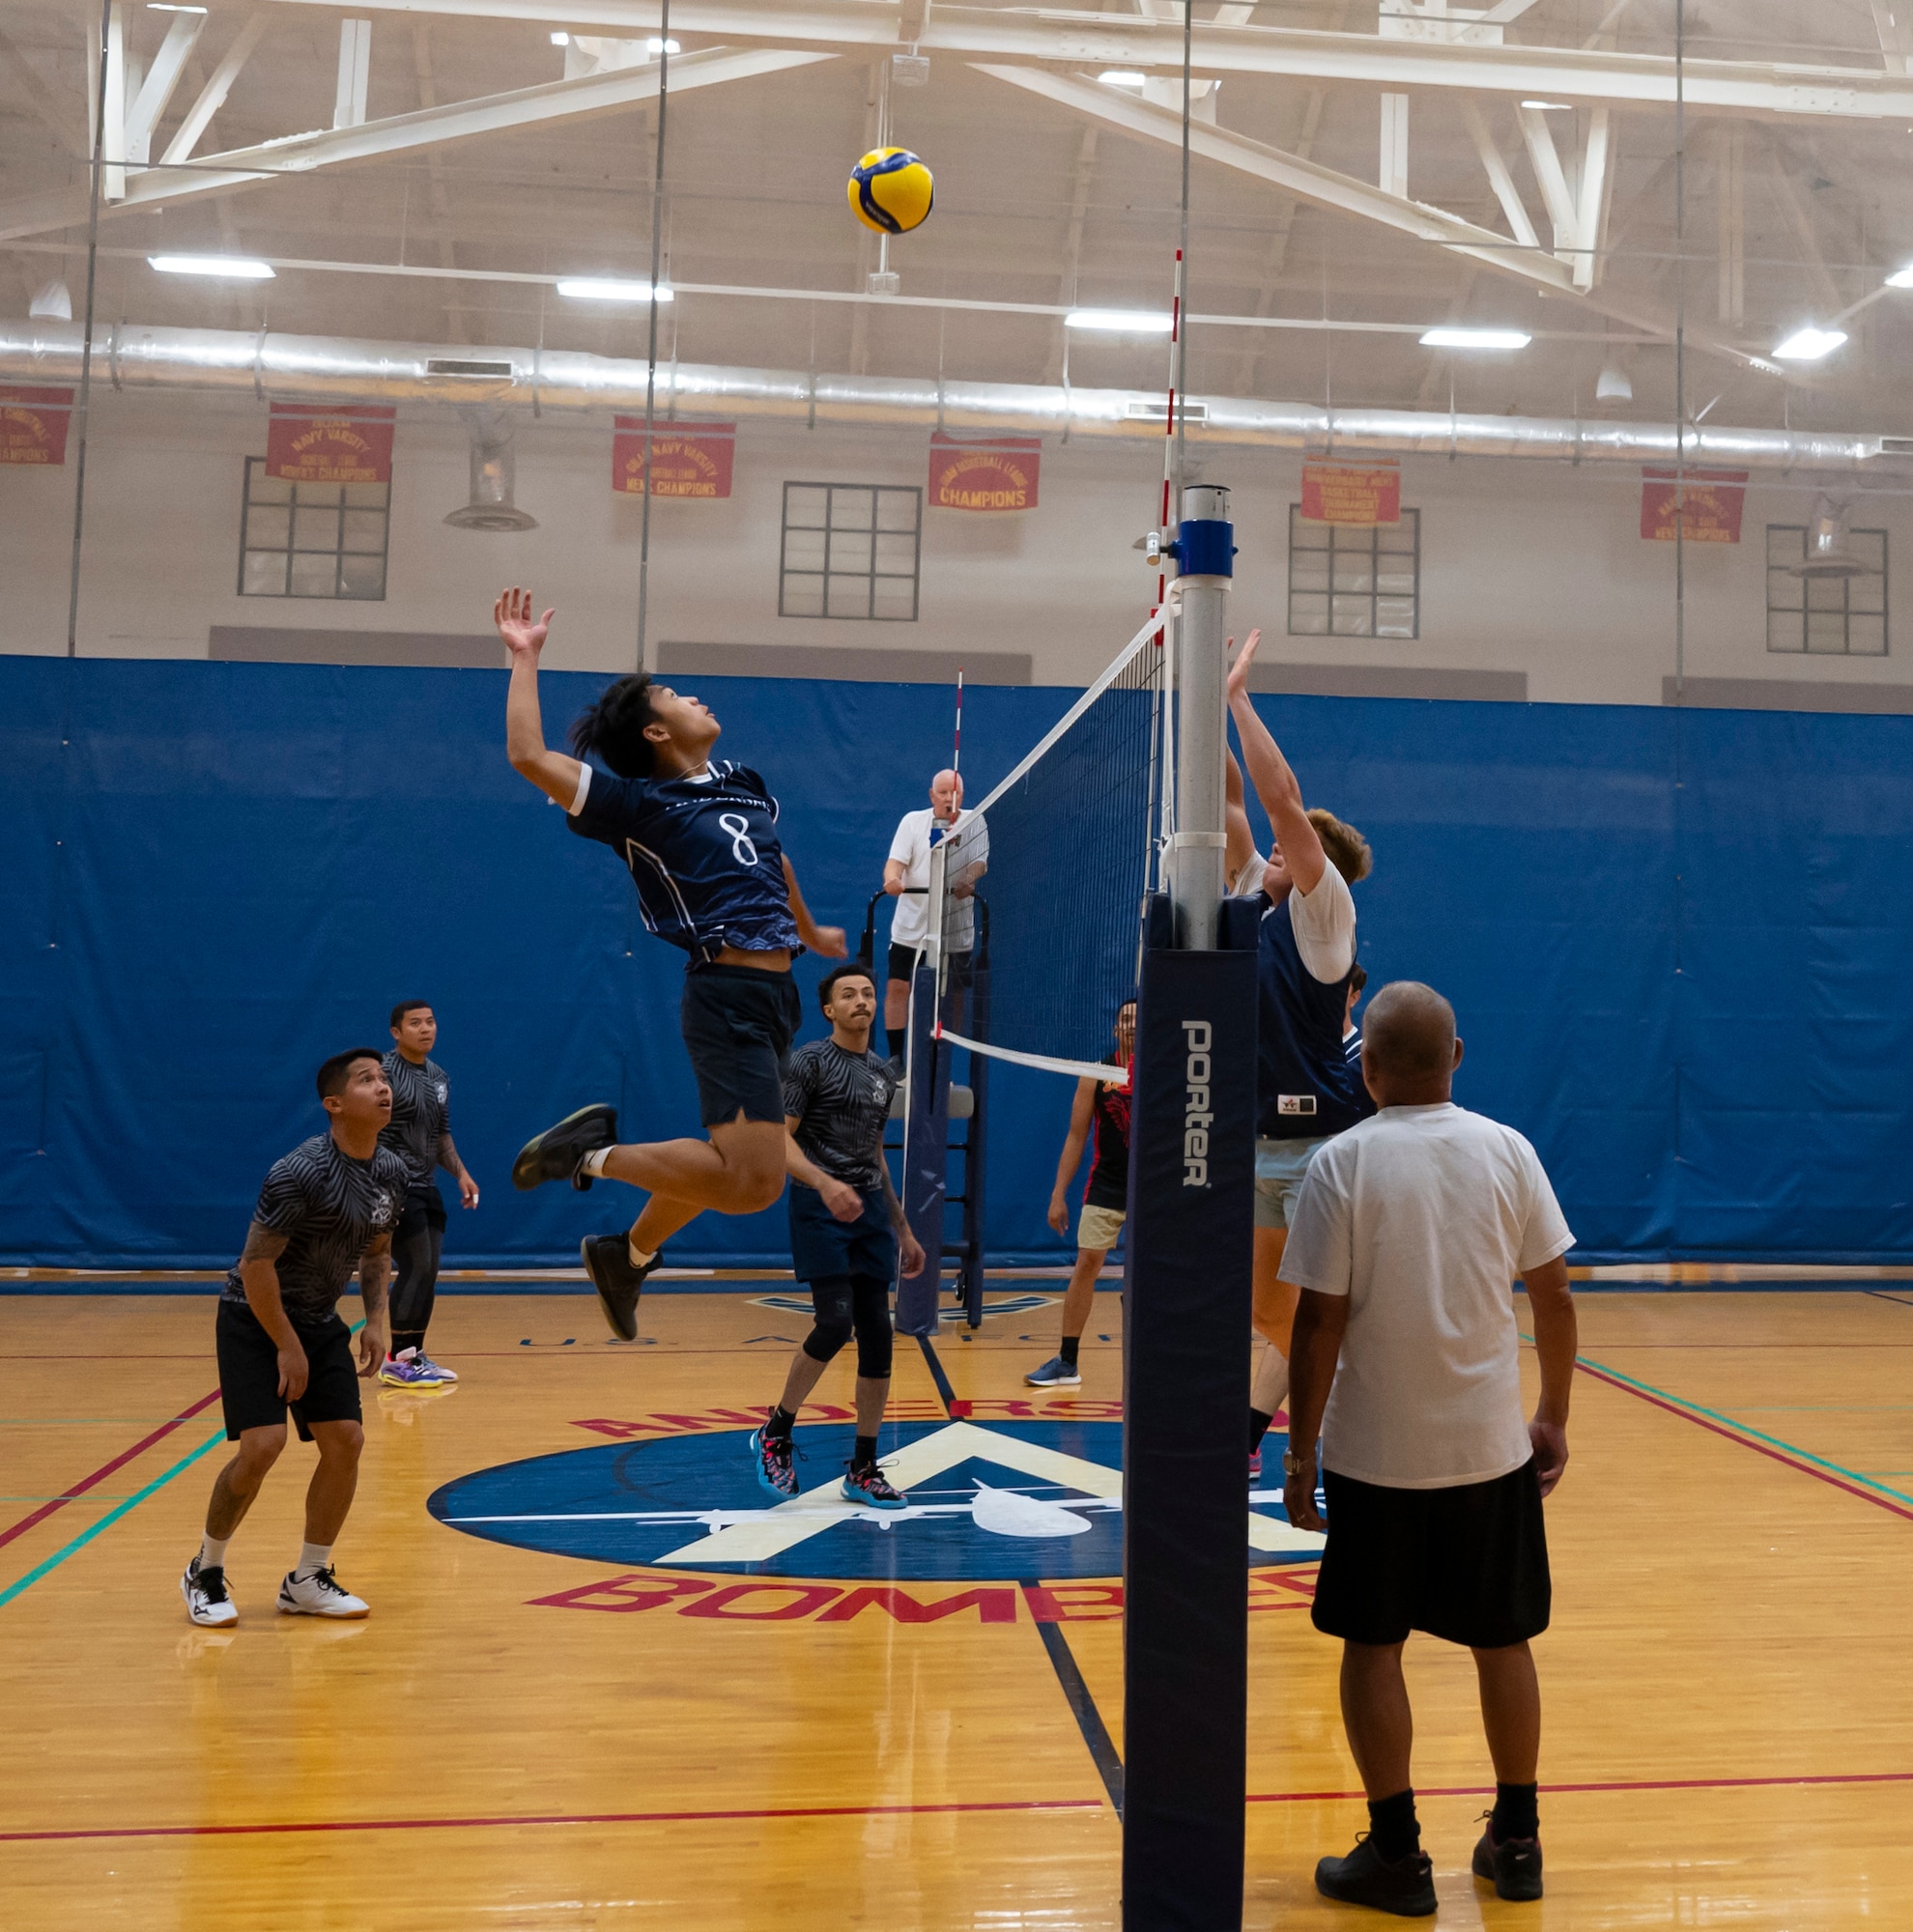 A member of the Security Forces Squadron’s intramural volleyball team jumps to spike the ball during the championship game on Andersen Air Force Base, Guam, Oct. 26, 2023.  Andersen’s intramural volleyball league ended in a climactic final game between the Security Forces Squadron and CES. The game ended with SFS being named the champions. (U.S. Air Force photo by Airman 1st Class Spencer Perkins)